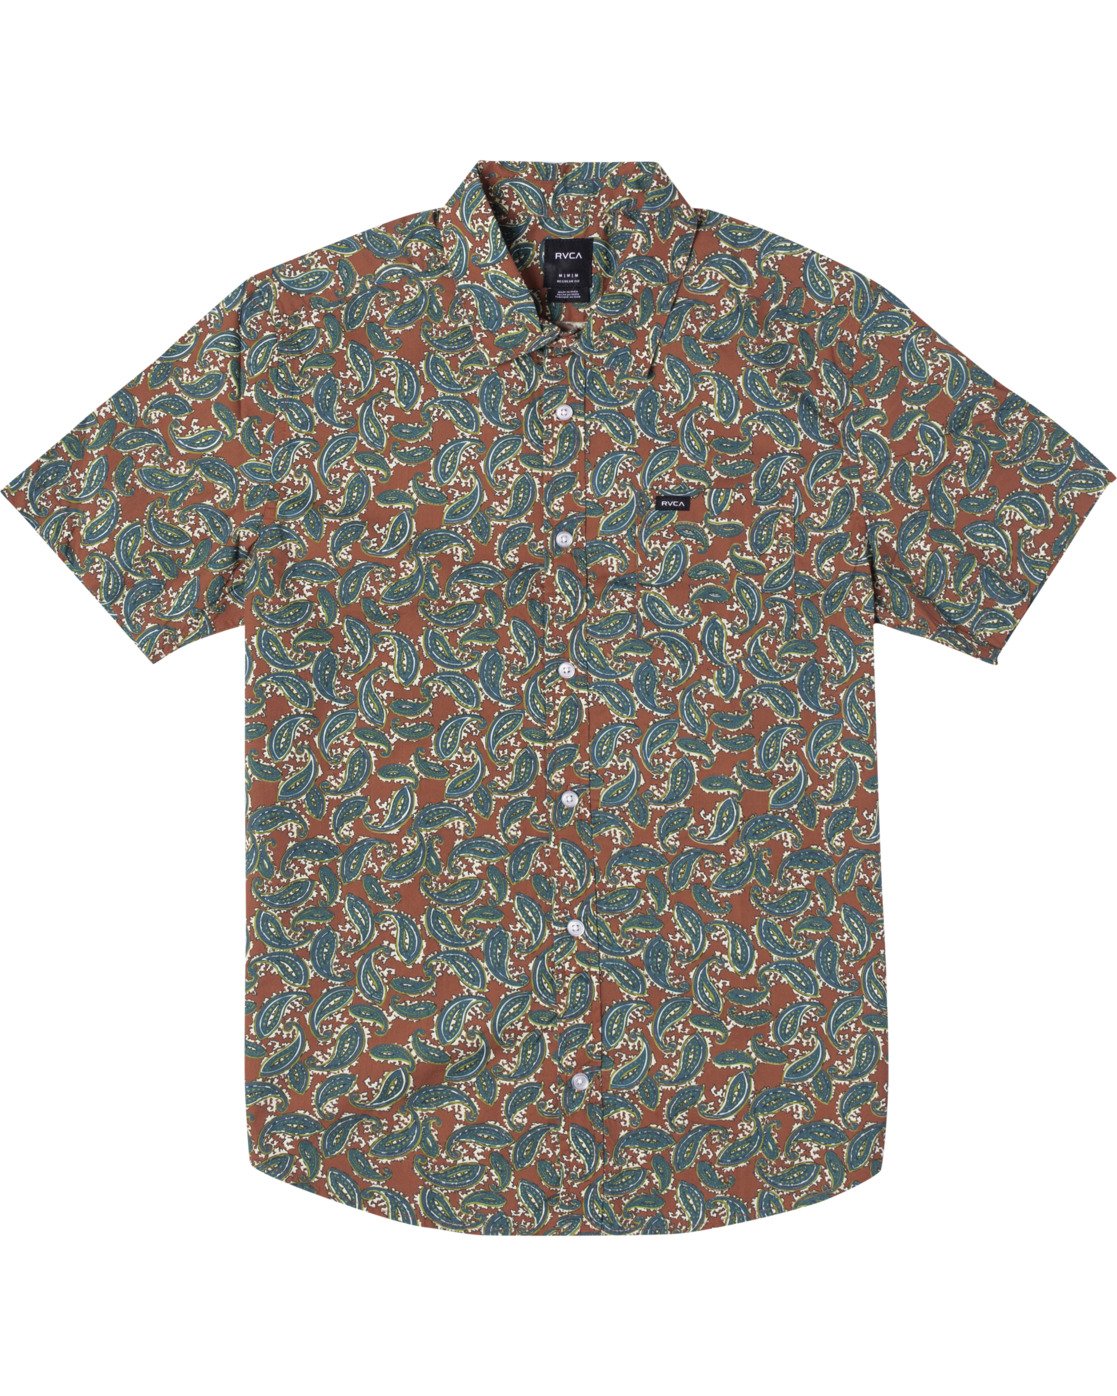 RVCA MIND FLOWER PAISLEY SS CLAY